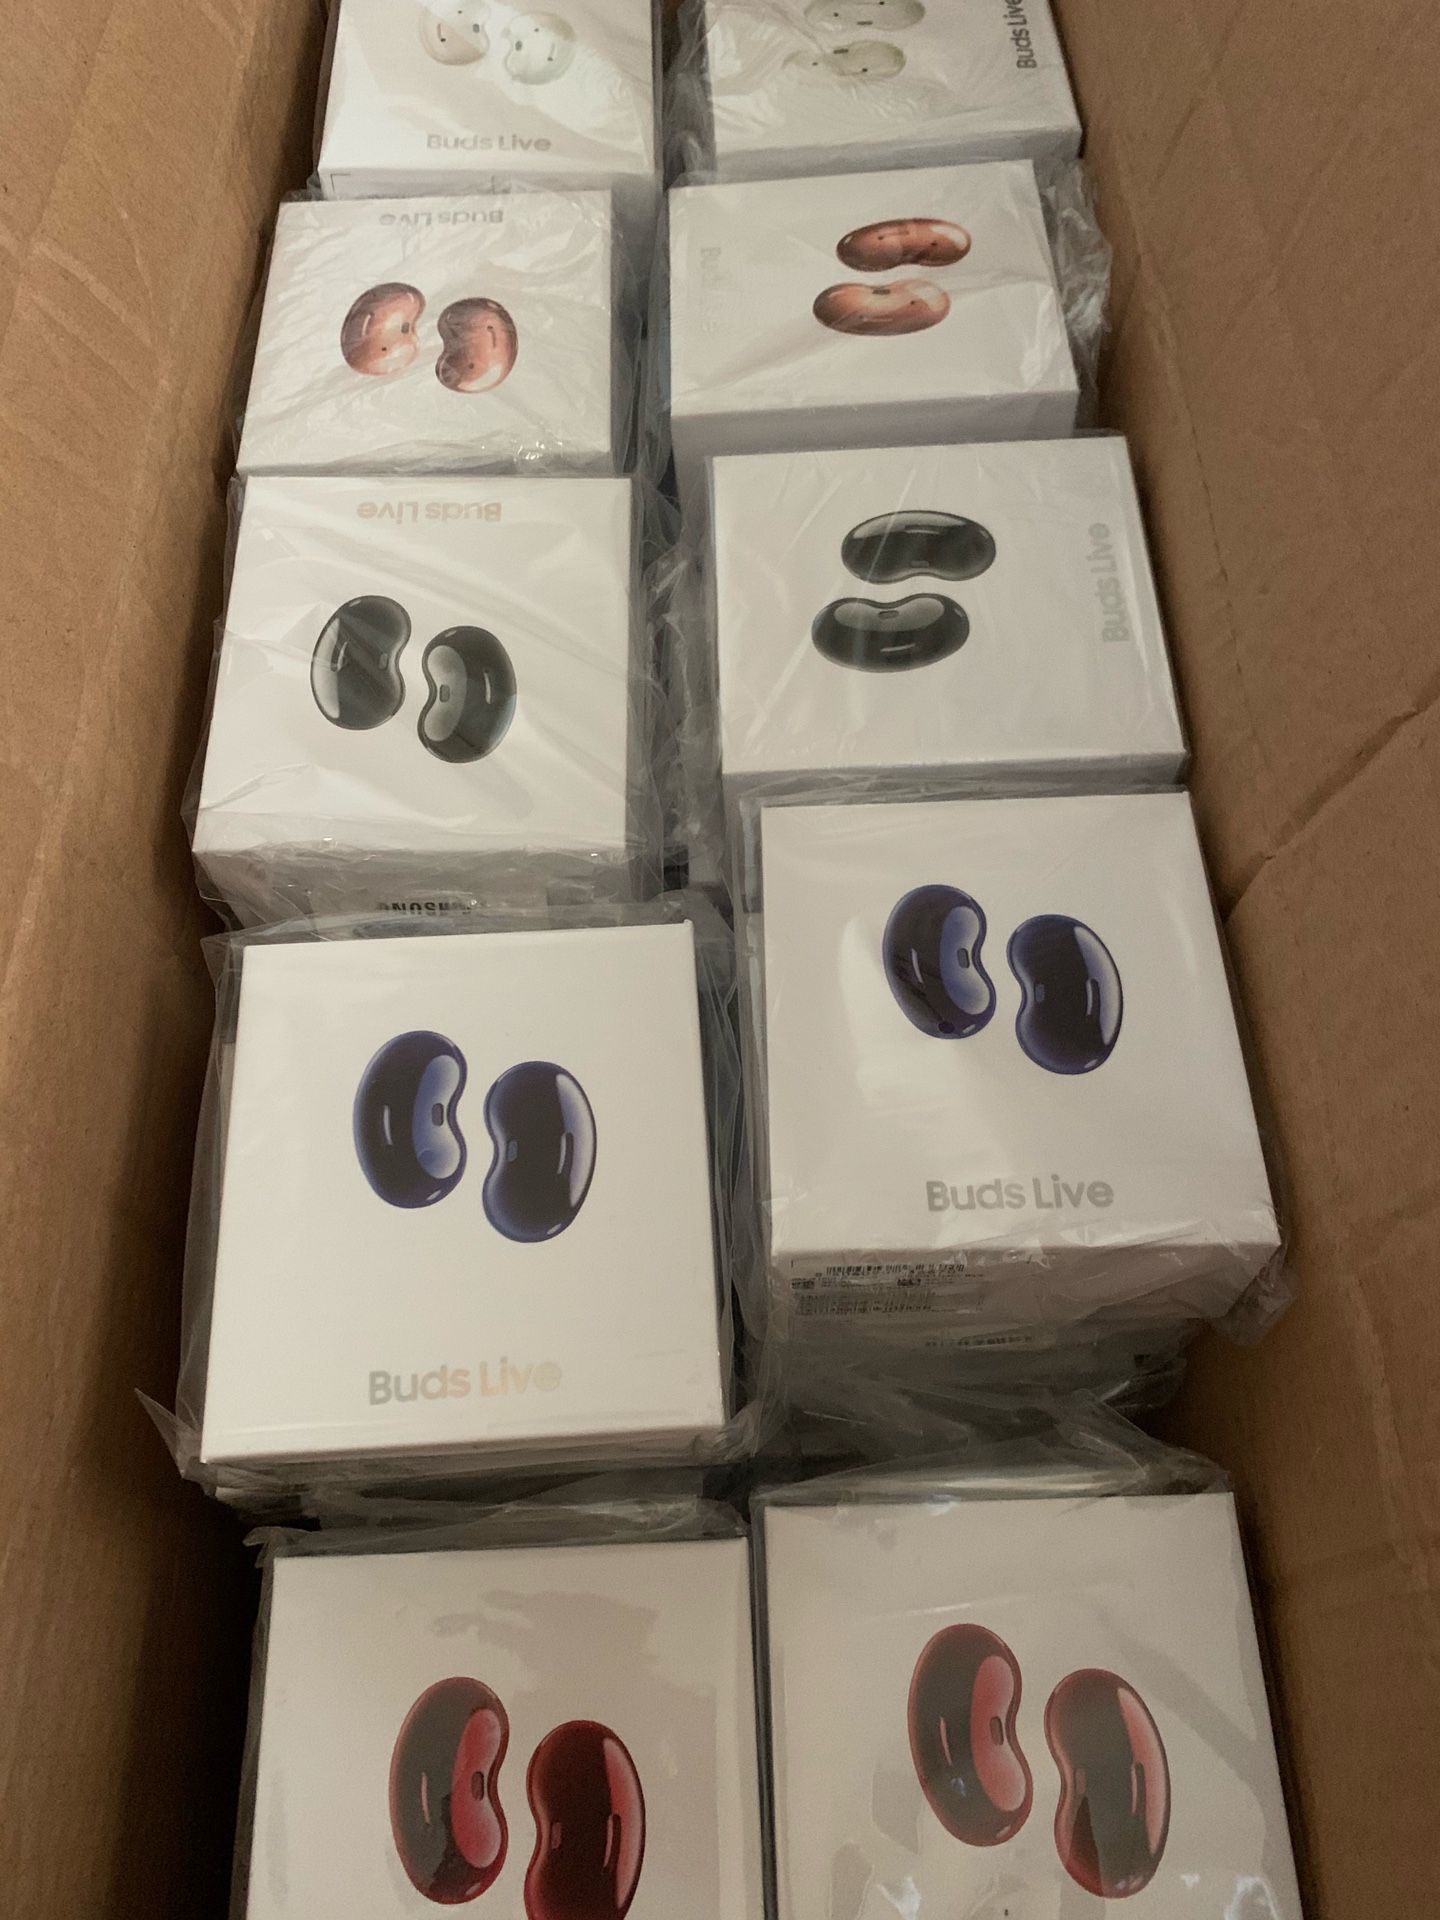 BRAND NEW SAMSUNG GALAXY BUDS LIVE WIRELESS  HEADPHONES AIRPODS EARPHONES BLUETOOTH FATHER’S DAY GIFT 